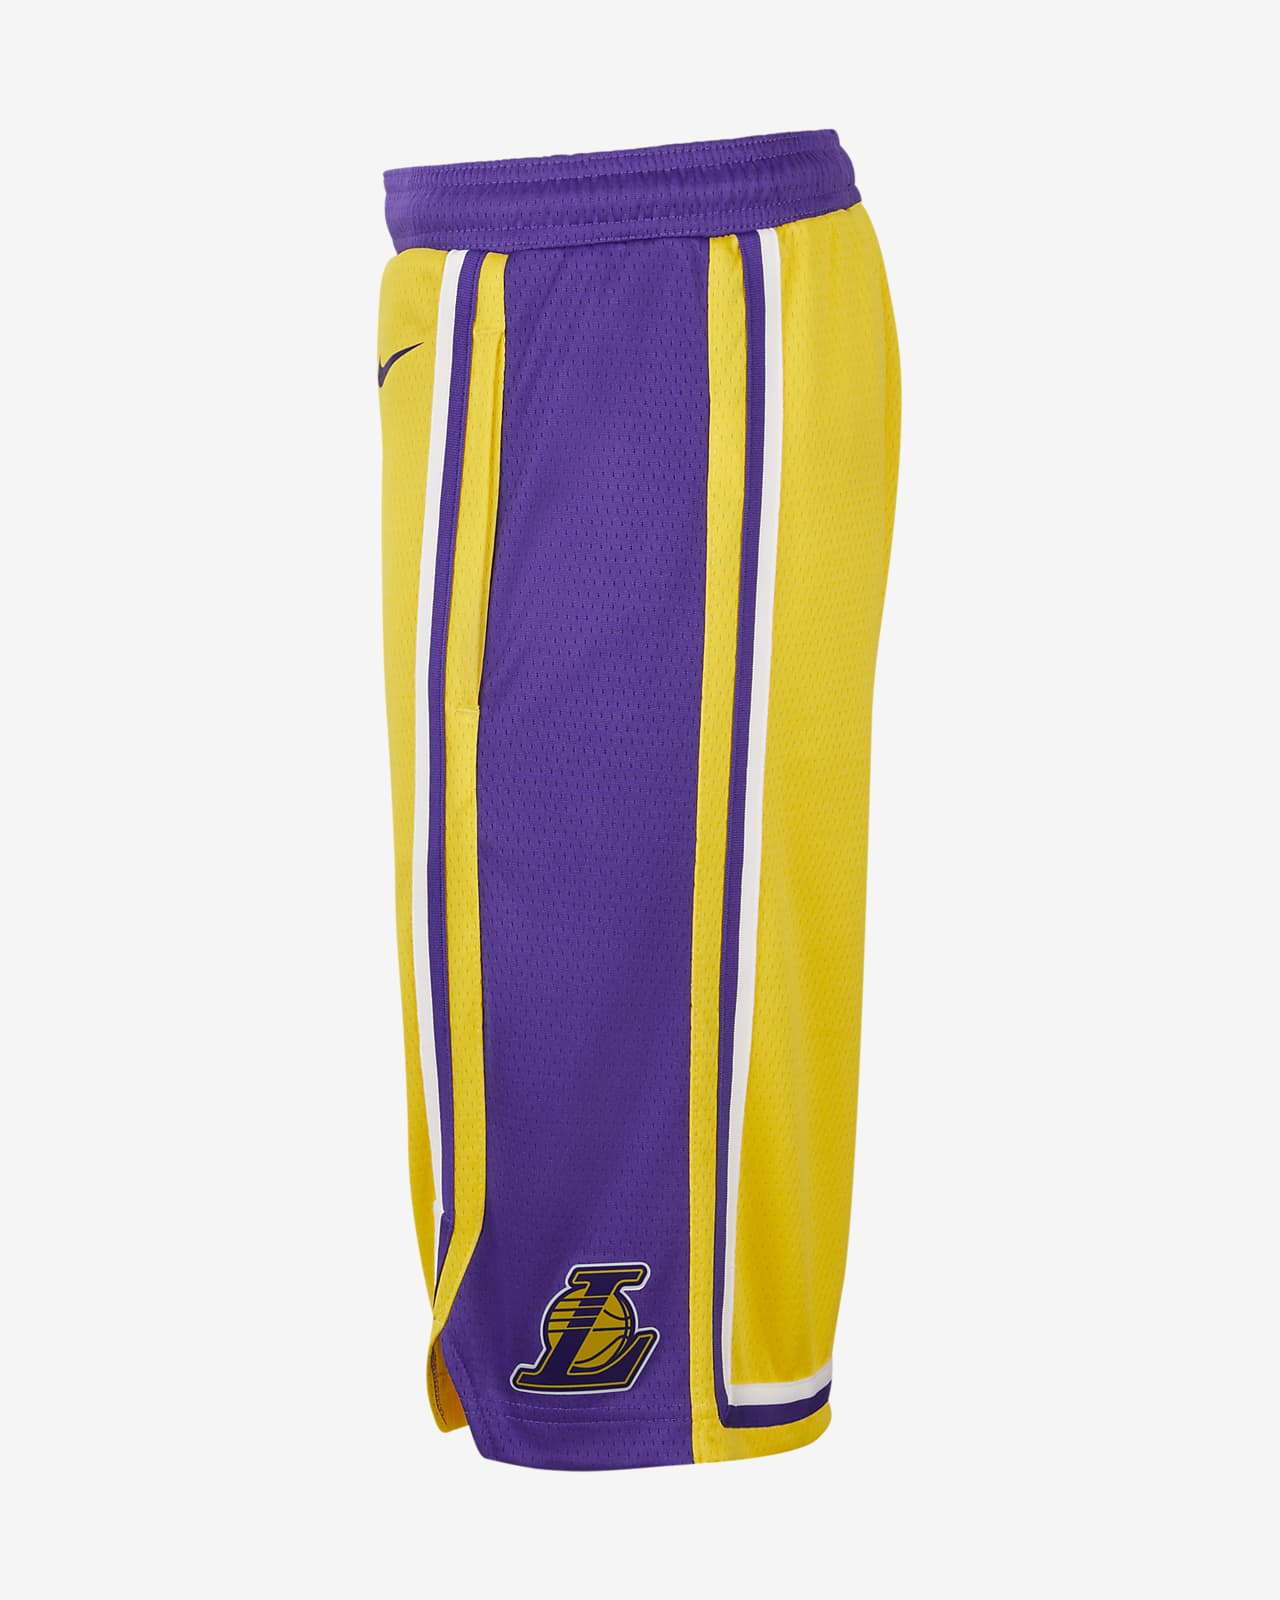 Lakers Basketball Shorts Youth / Wru4l3digs4ozm : Free shipping for ...